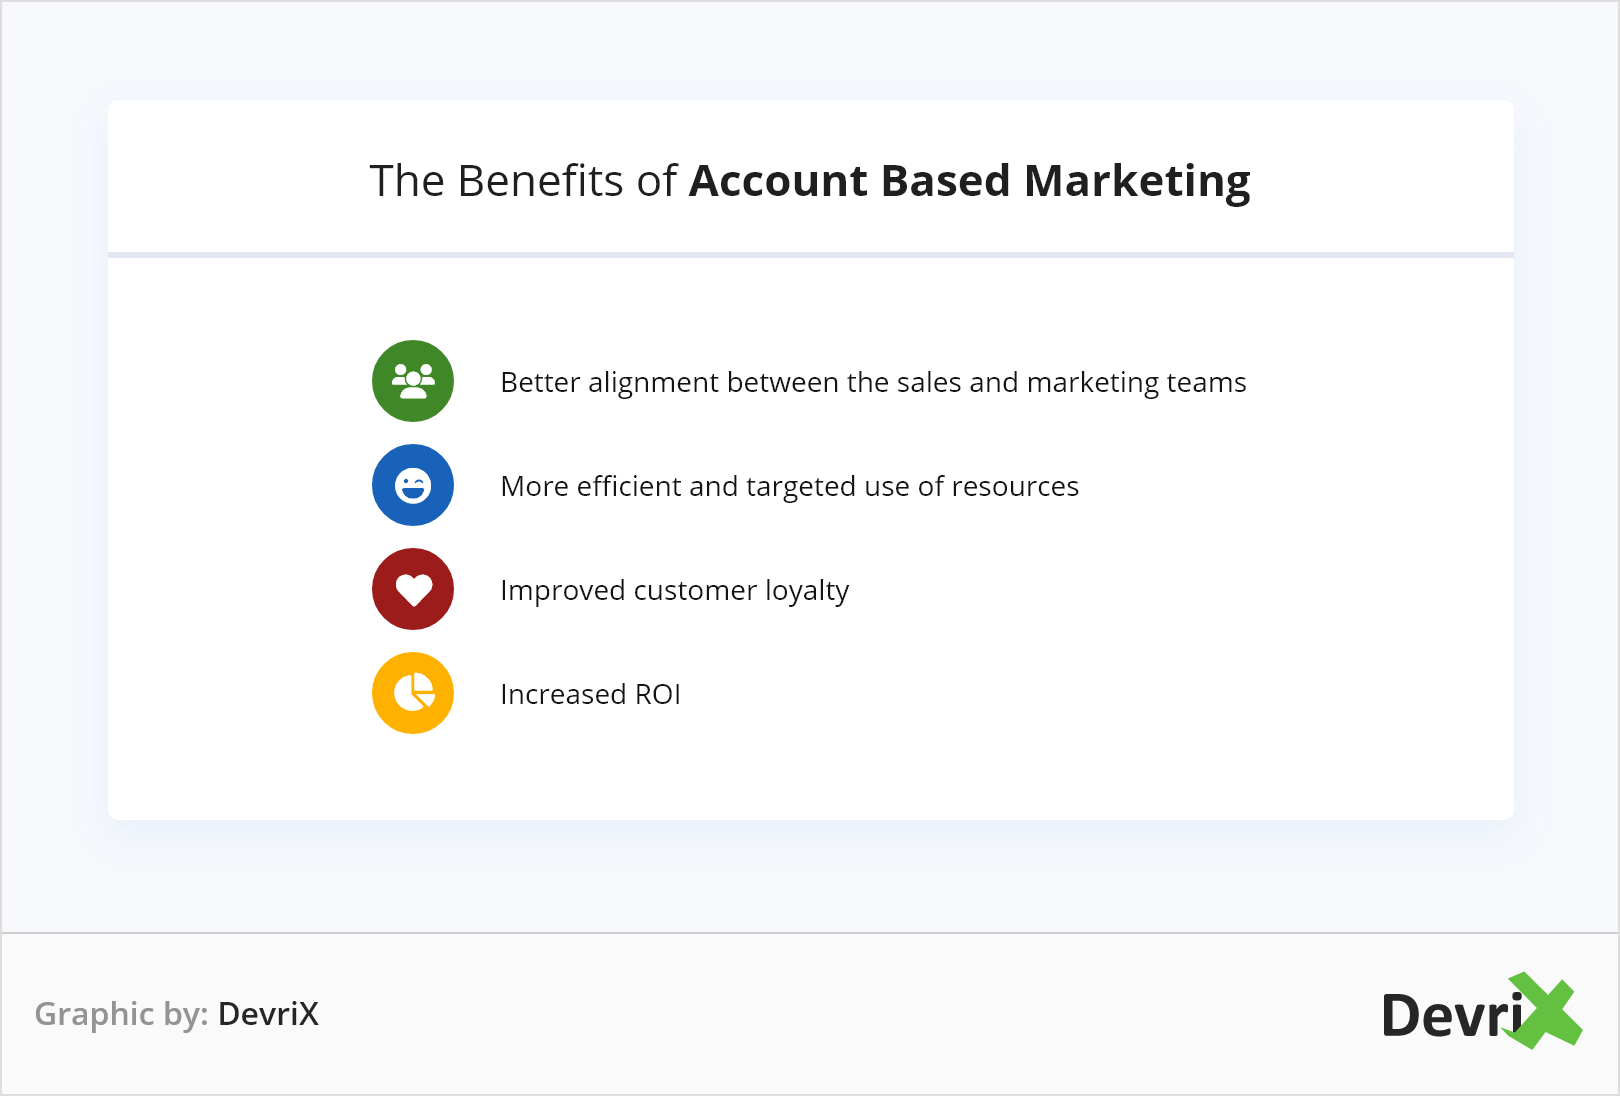 The Benefits of Account Based Marketing